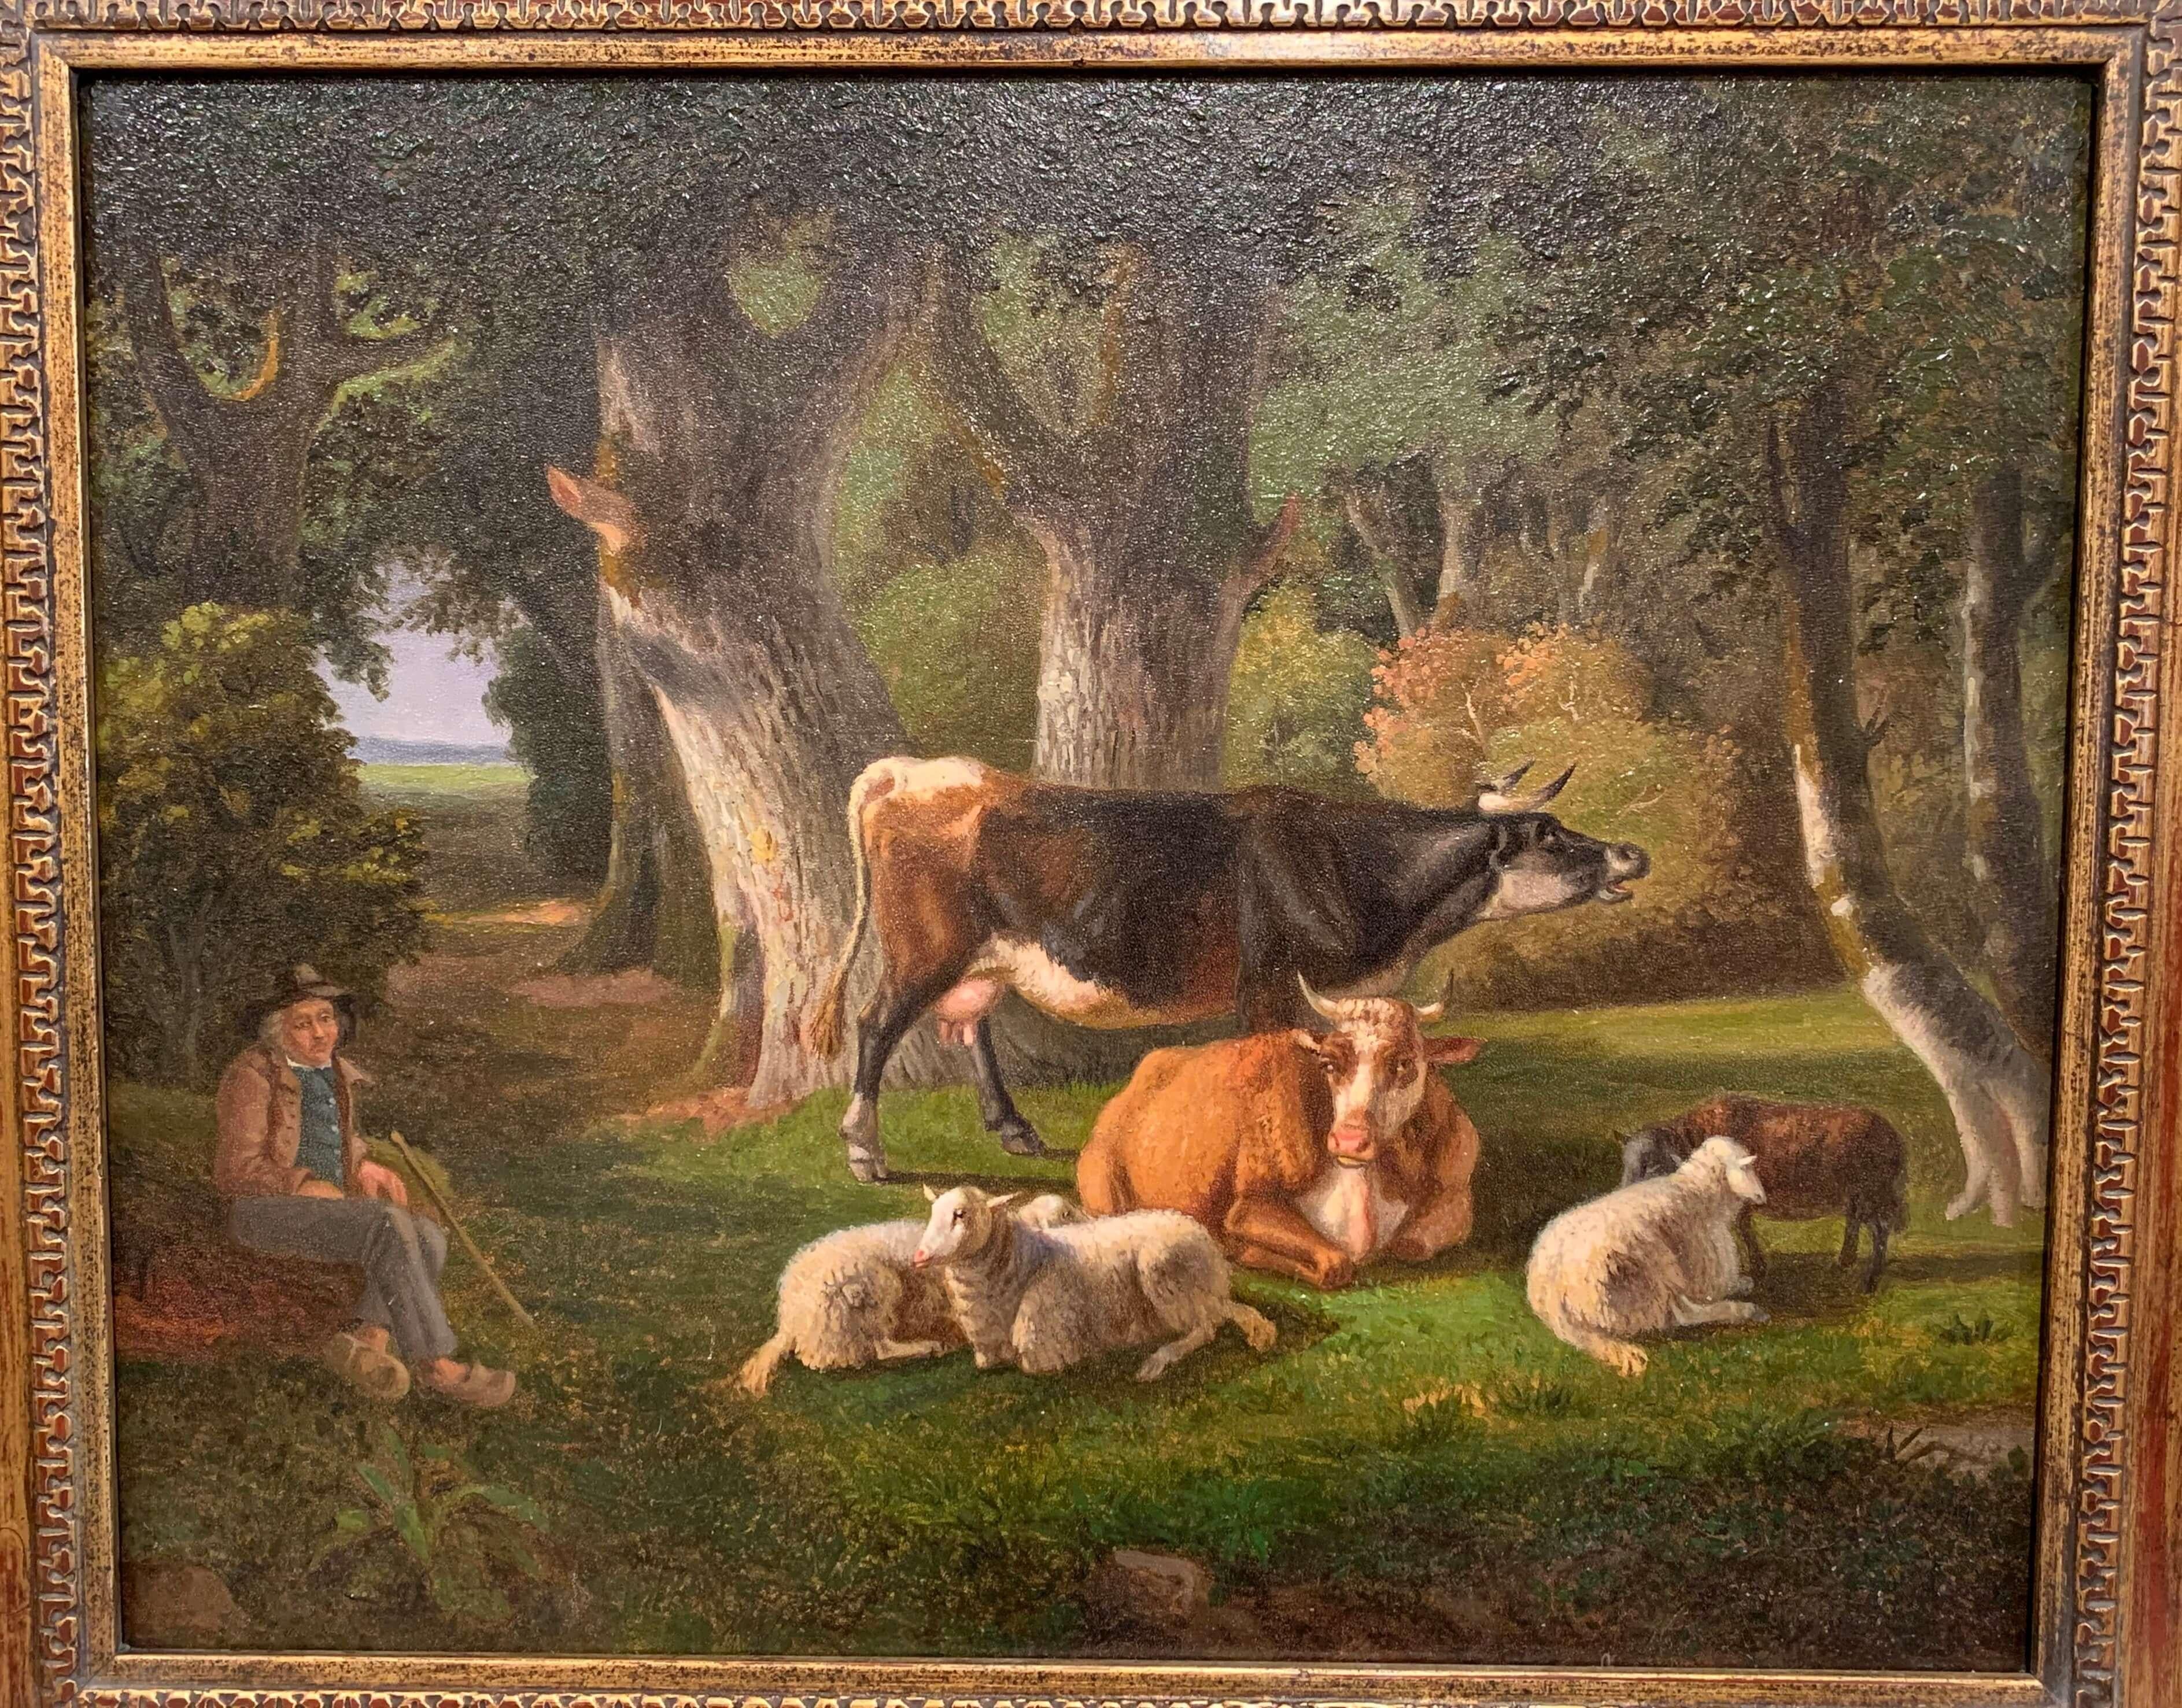 This elegant animal painting was created in France, circa 1880. The bucolic, countryside painting is set in a carved gilt frame and depicts a pastoral scene with cows and sheep resting with a shepherd looking on. The painting is a beautiful example